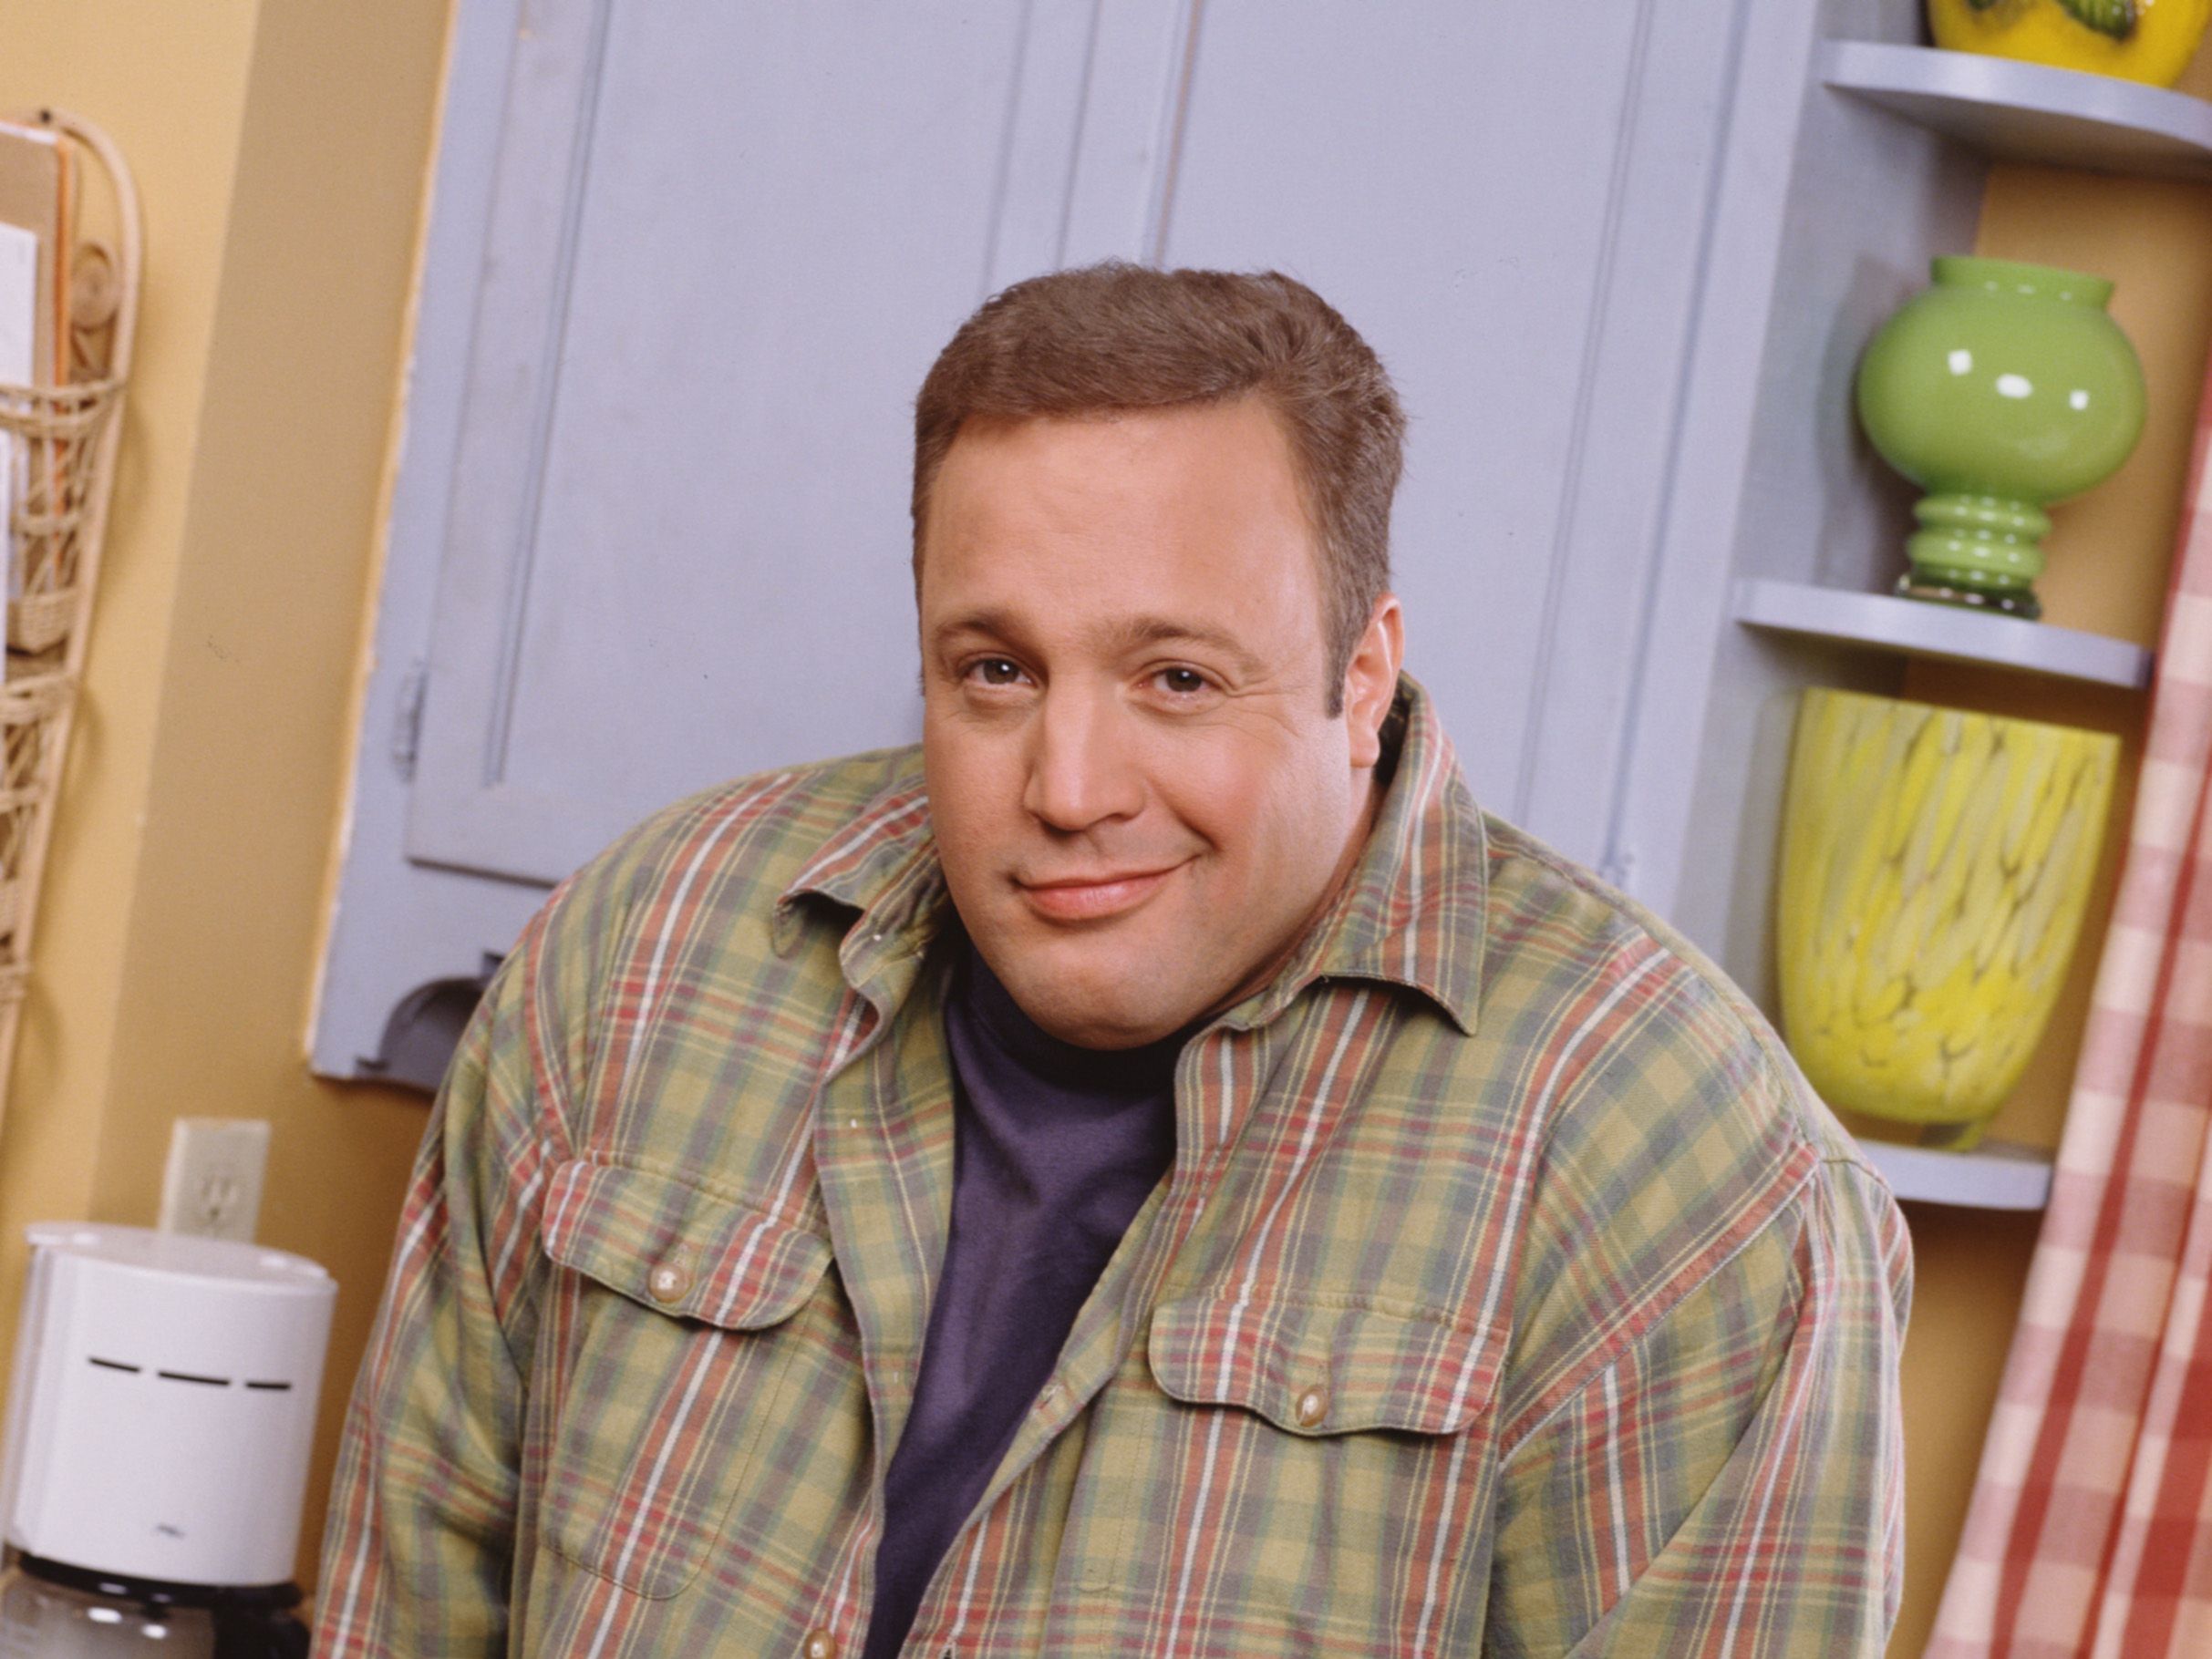 kevin james before and after